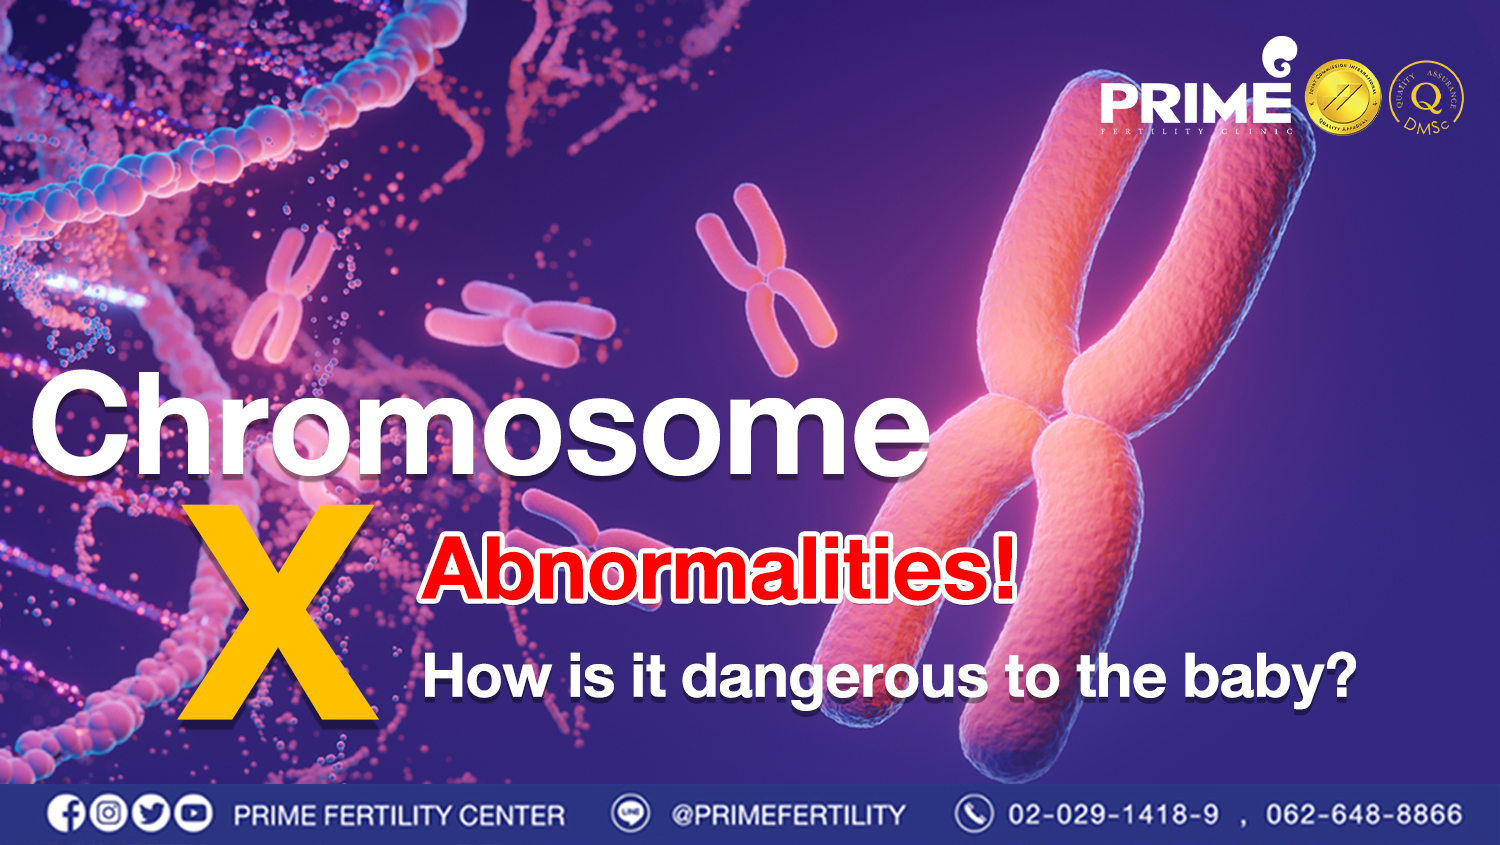 X chromosome abnormalities! How is it dangerous to the baby?
